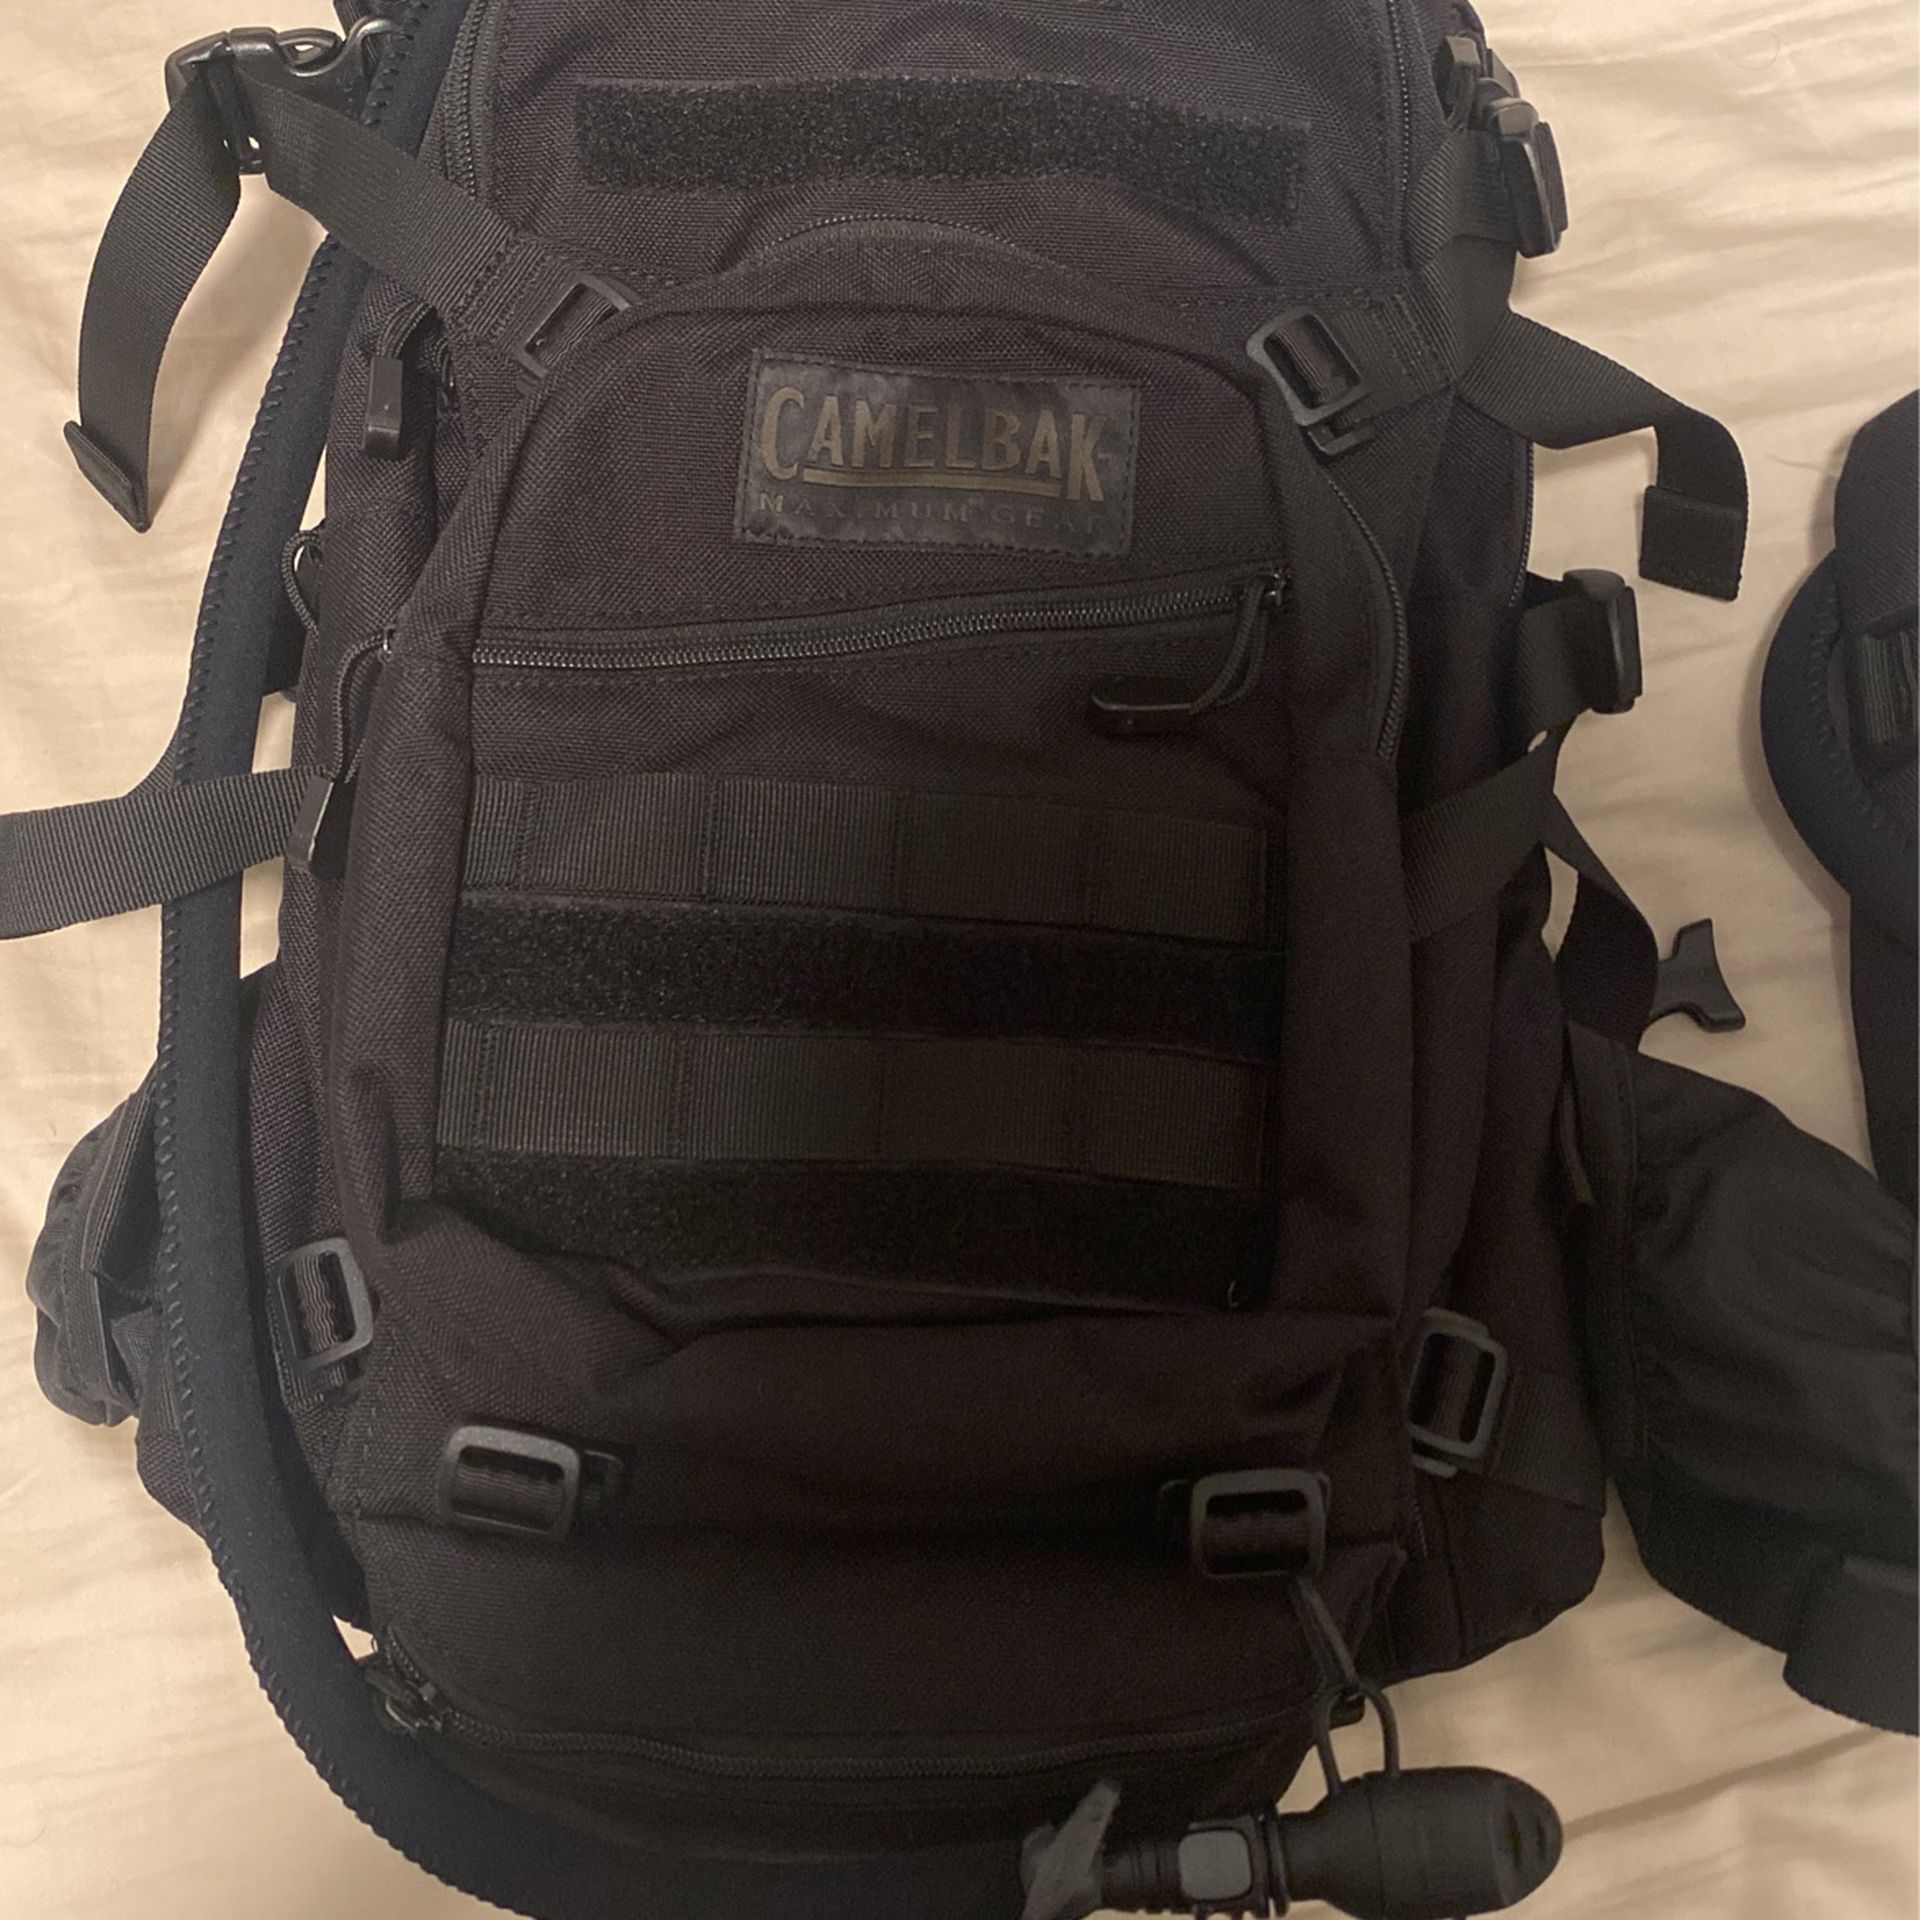 Camelback Waist And Backpack 